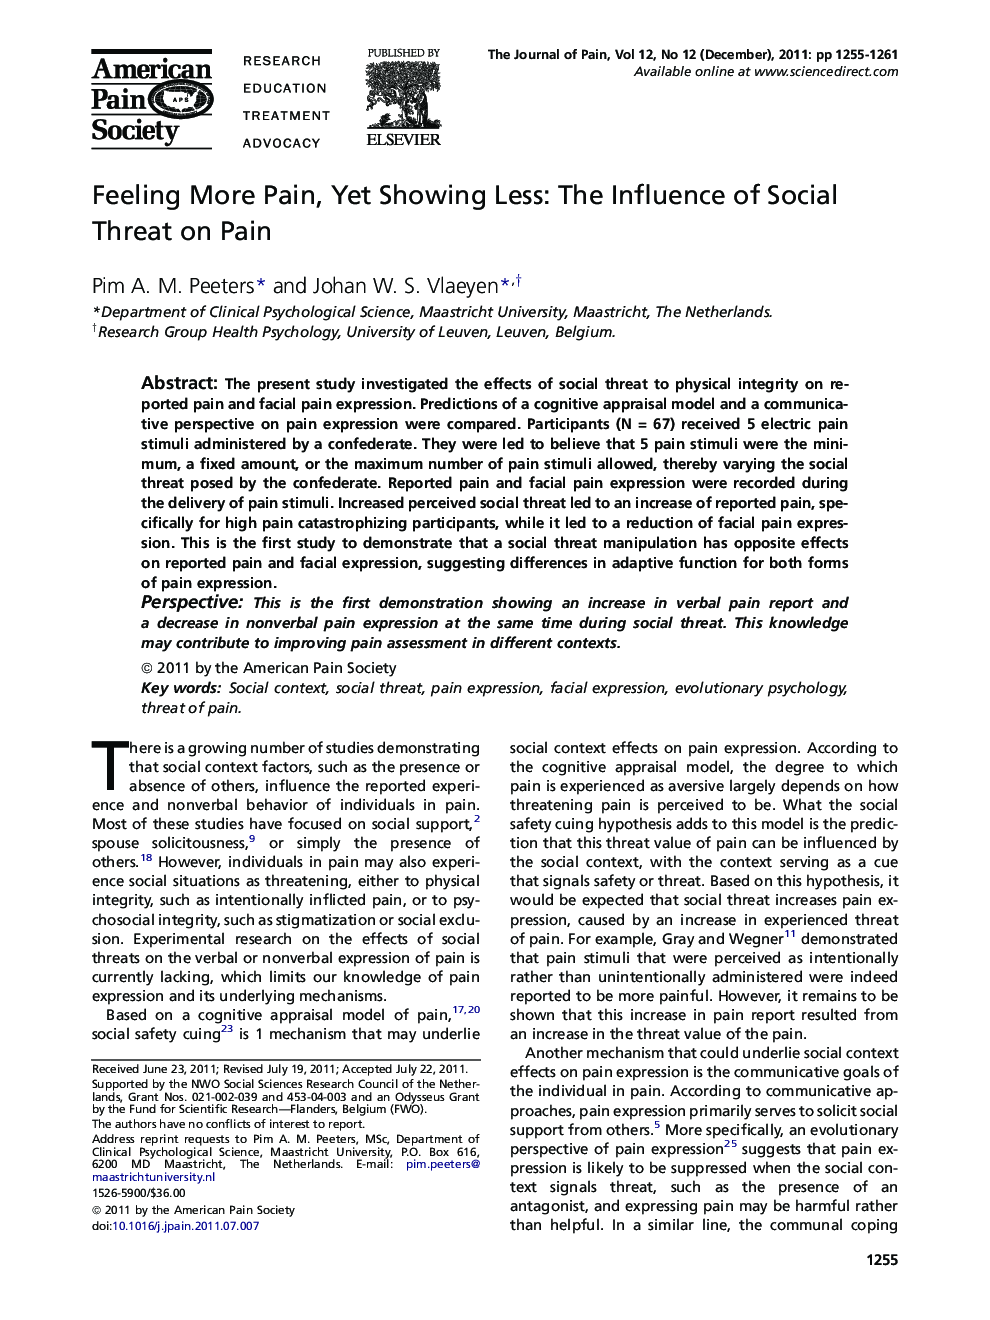 Feeling More Pain, Yet Showing Less: The Influence of Social Threat on Pain 